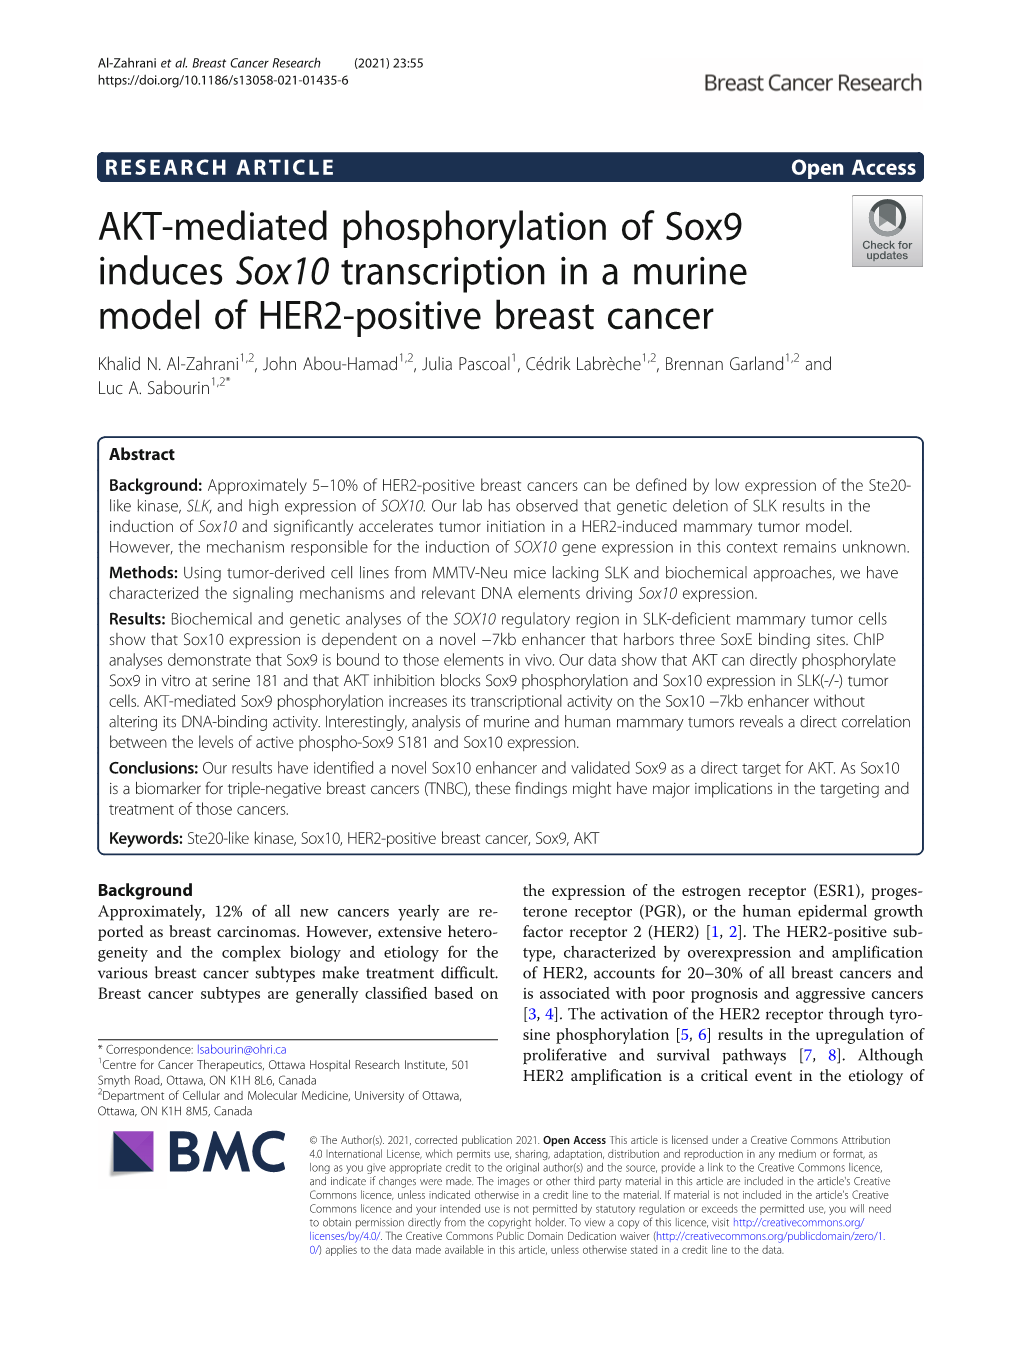 AKT-Mediated Phosphorylation of Sox9 Induces Sox10 Transcription in a Murine Model of HER2-Positive Breast Cancer Khalid N